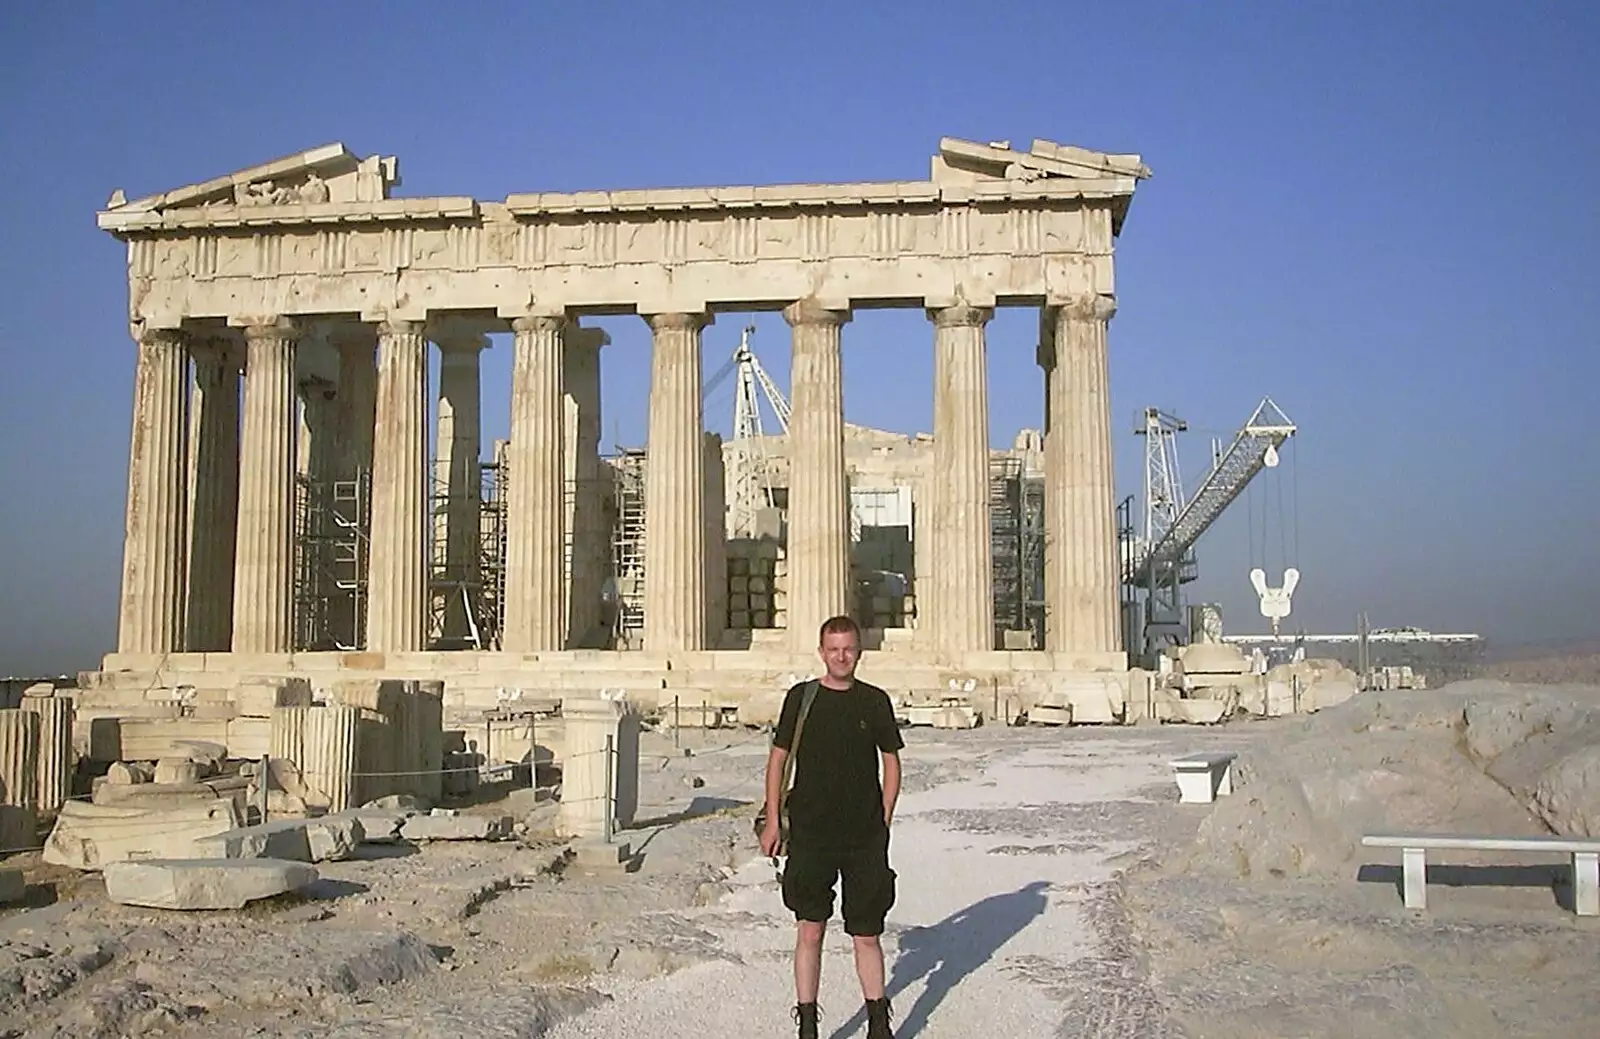 Nosher swaps photos with a tourist at the Parthenon, from A Postcard From Athens: A Day Trip to the Olympics, Greece - 19th August 2004